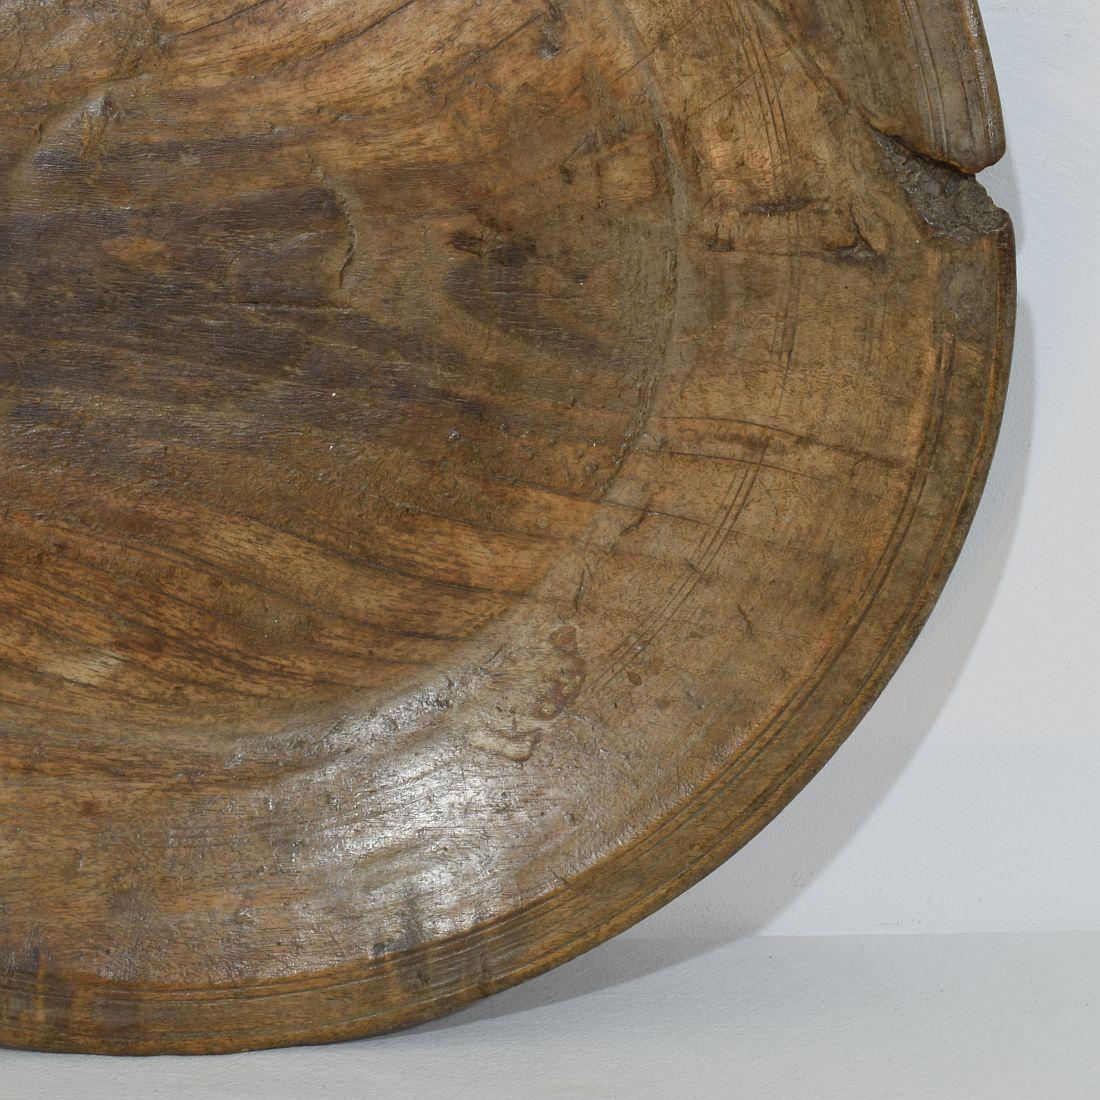 Large 18th Century French Wooden Bowl / Platter For Sale 5